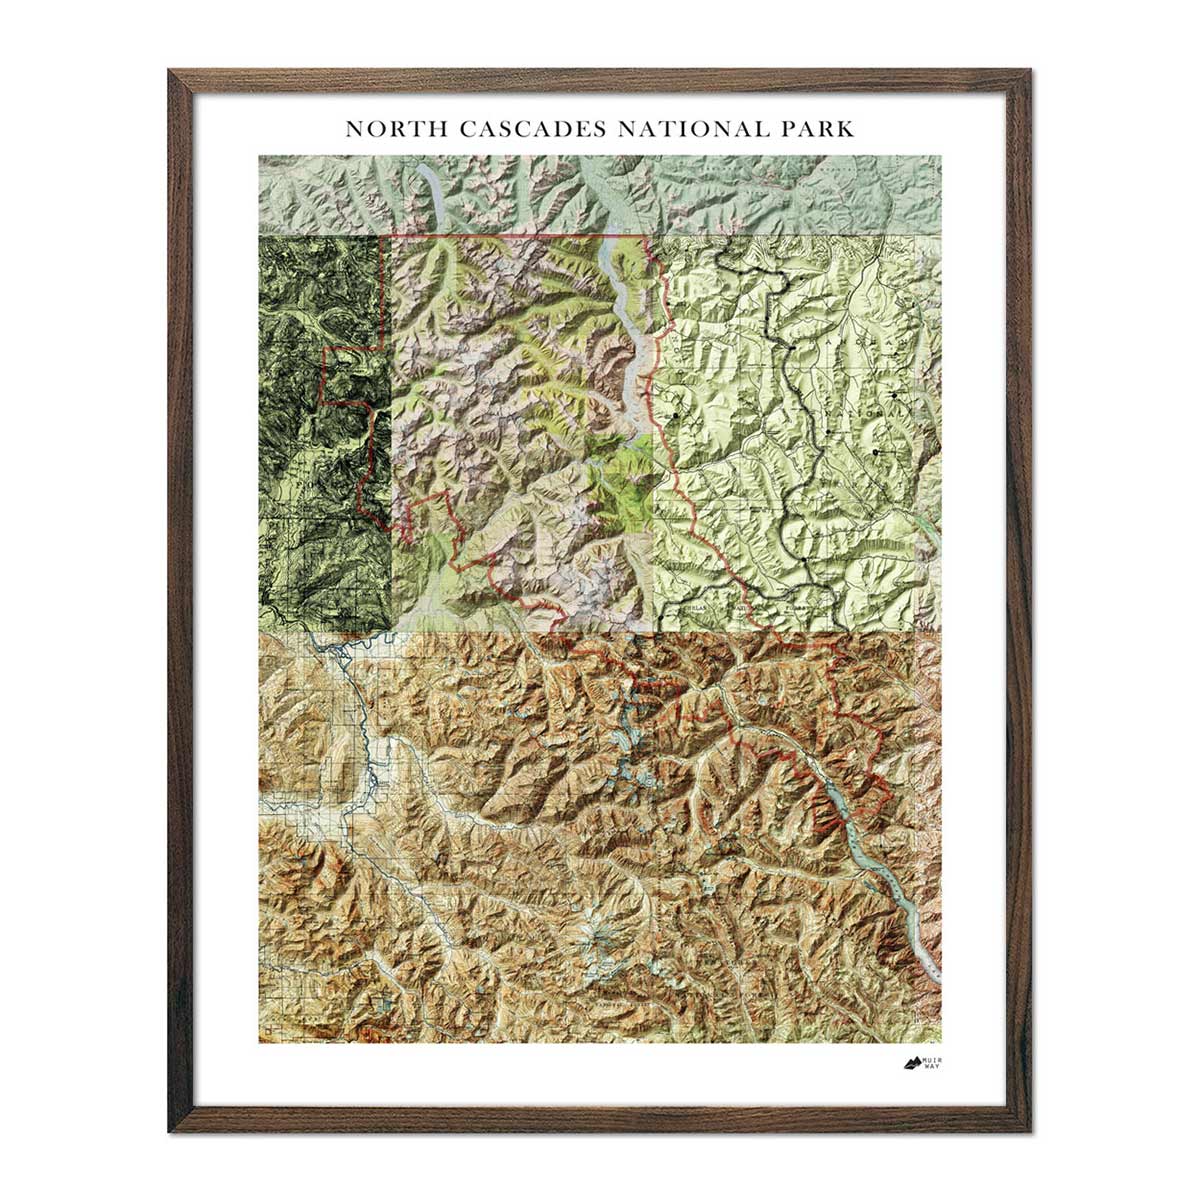 Relief Map of North Cascades National Park